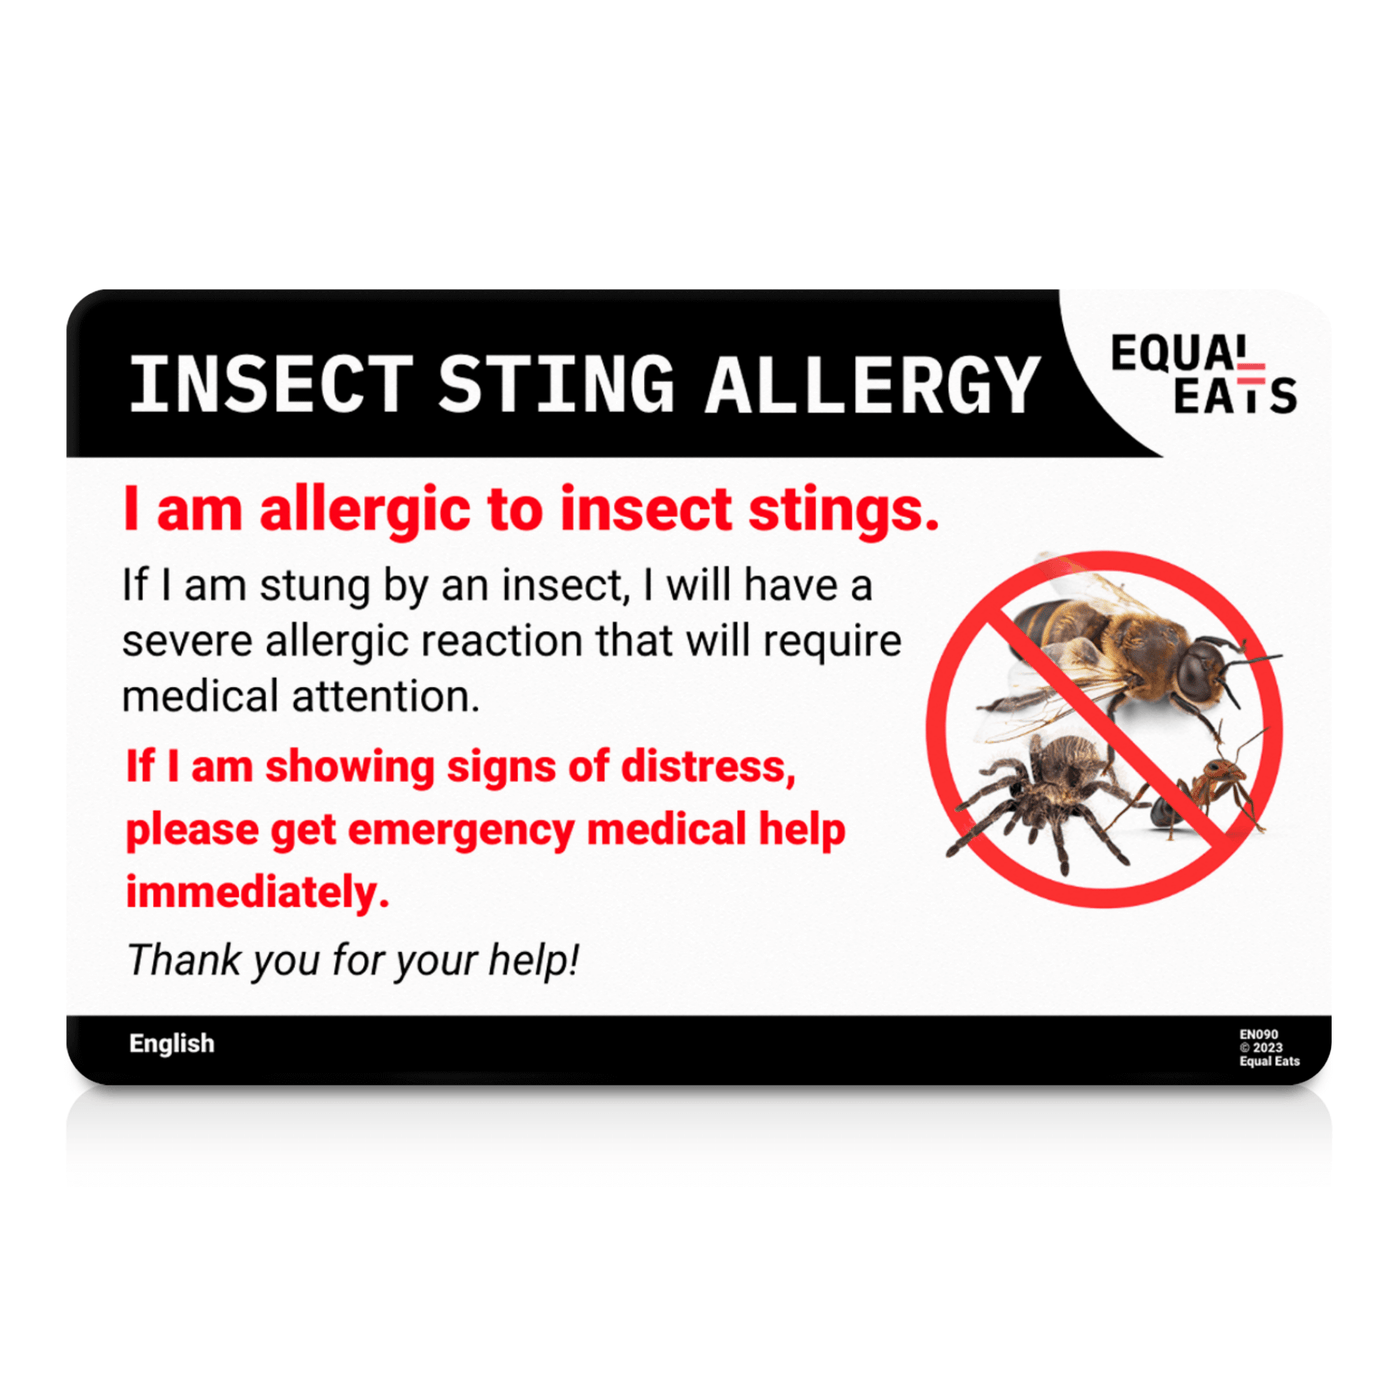 Lithuanian Insect Sting Allergy Card